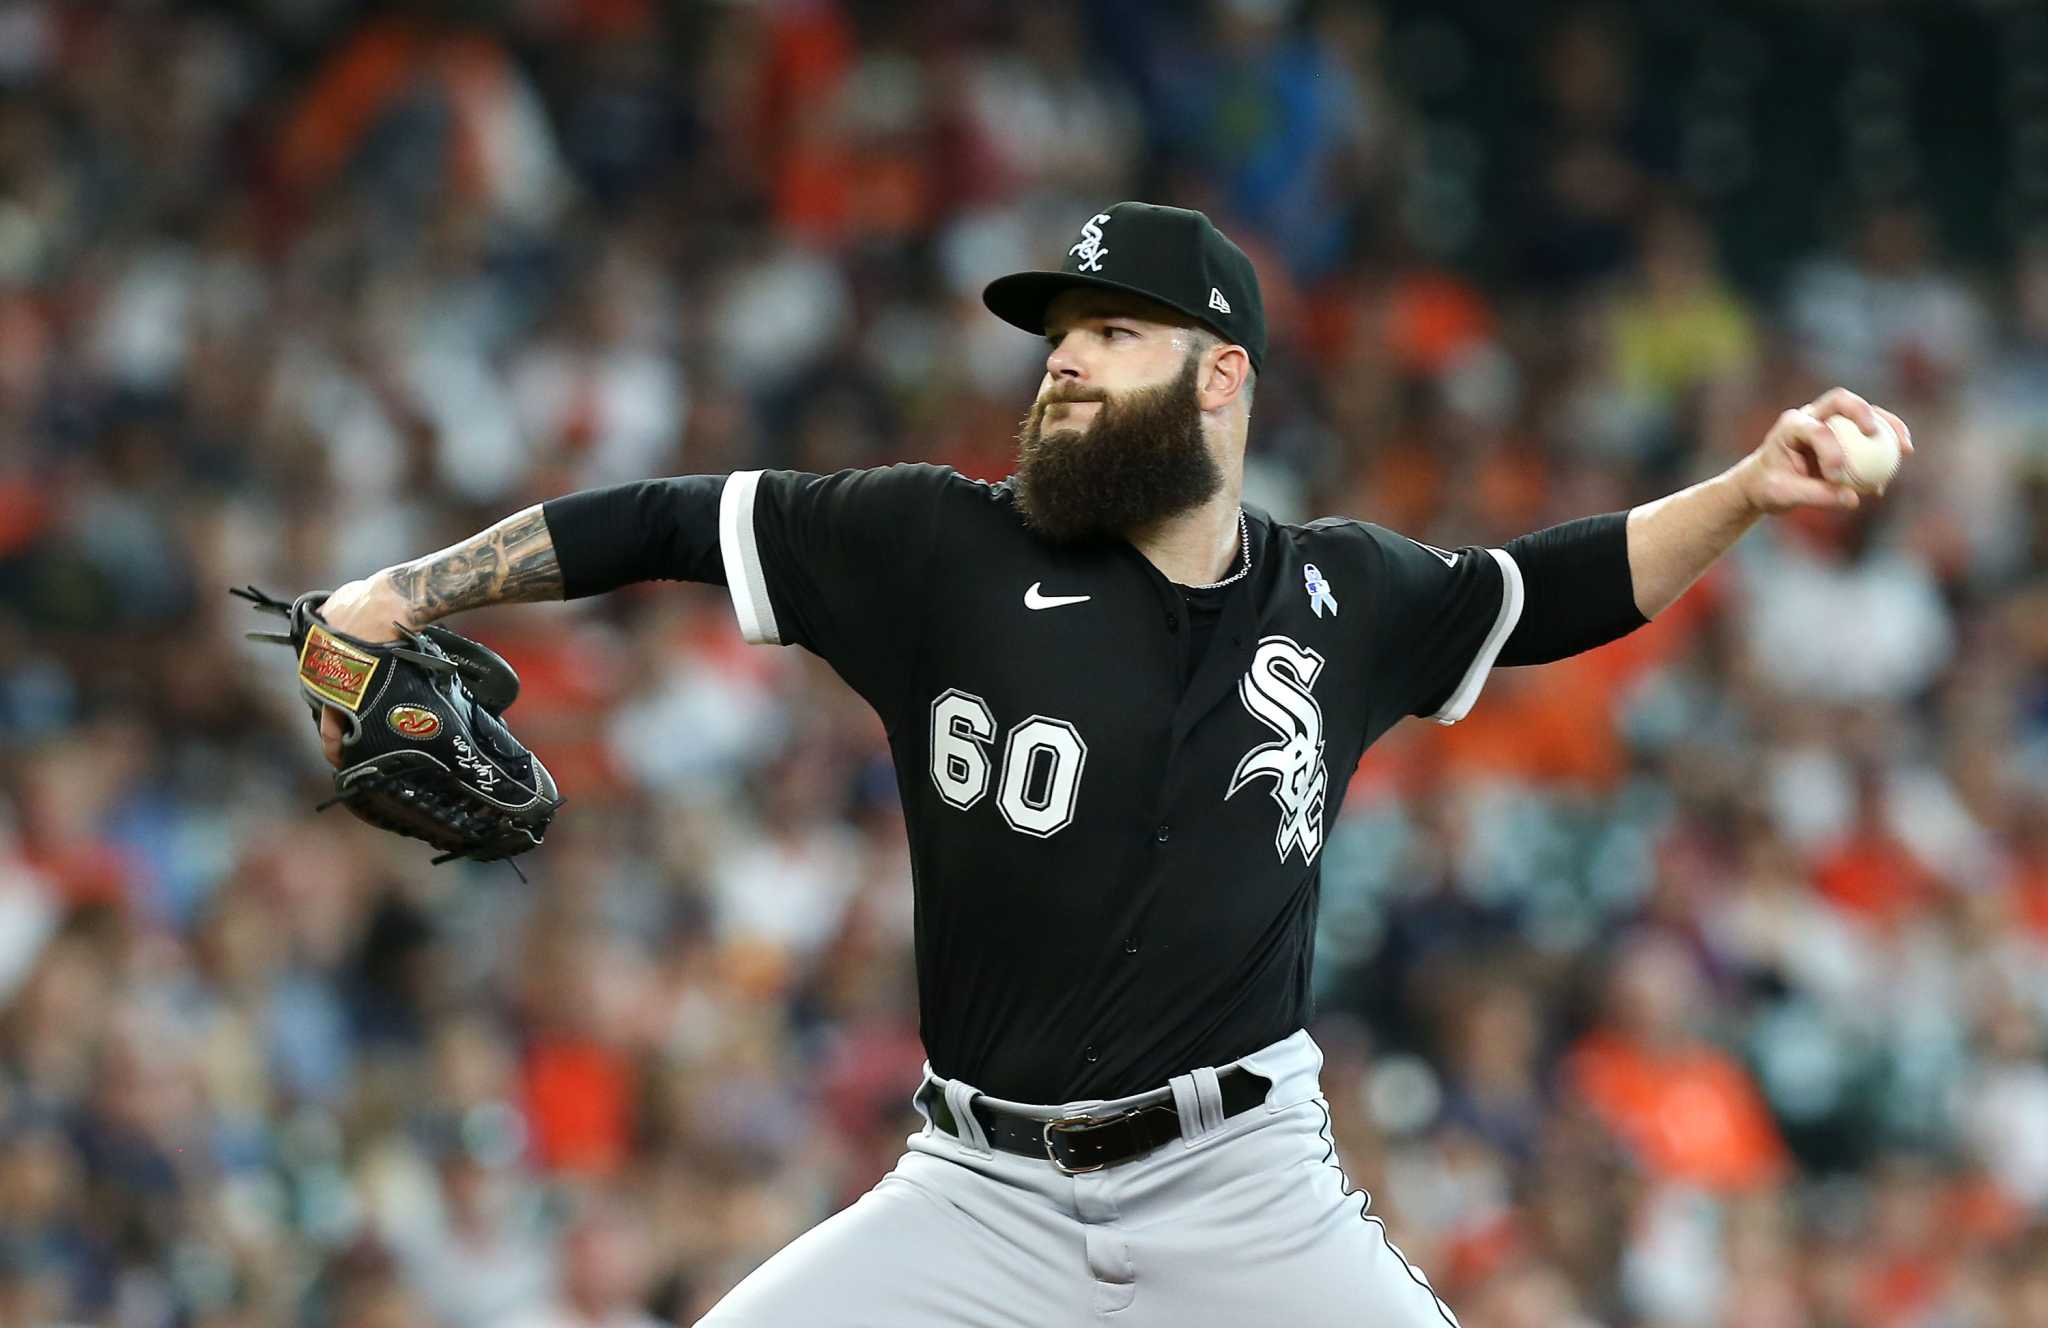 Dallas Keuchel empties his wallet, preps for new start with White Sox